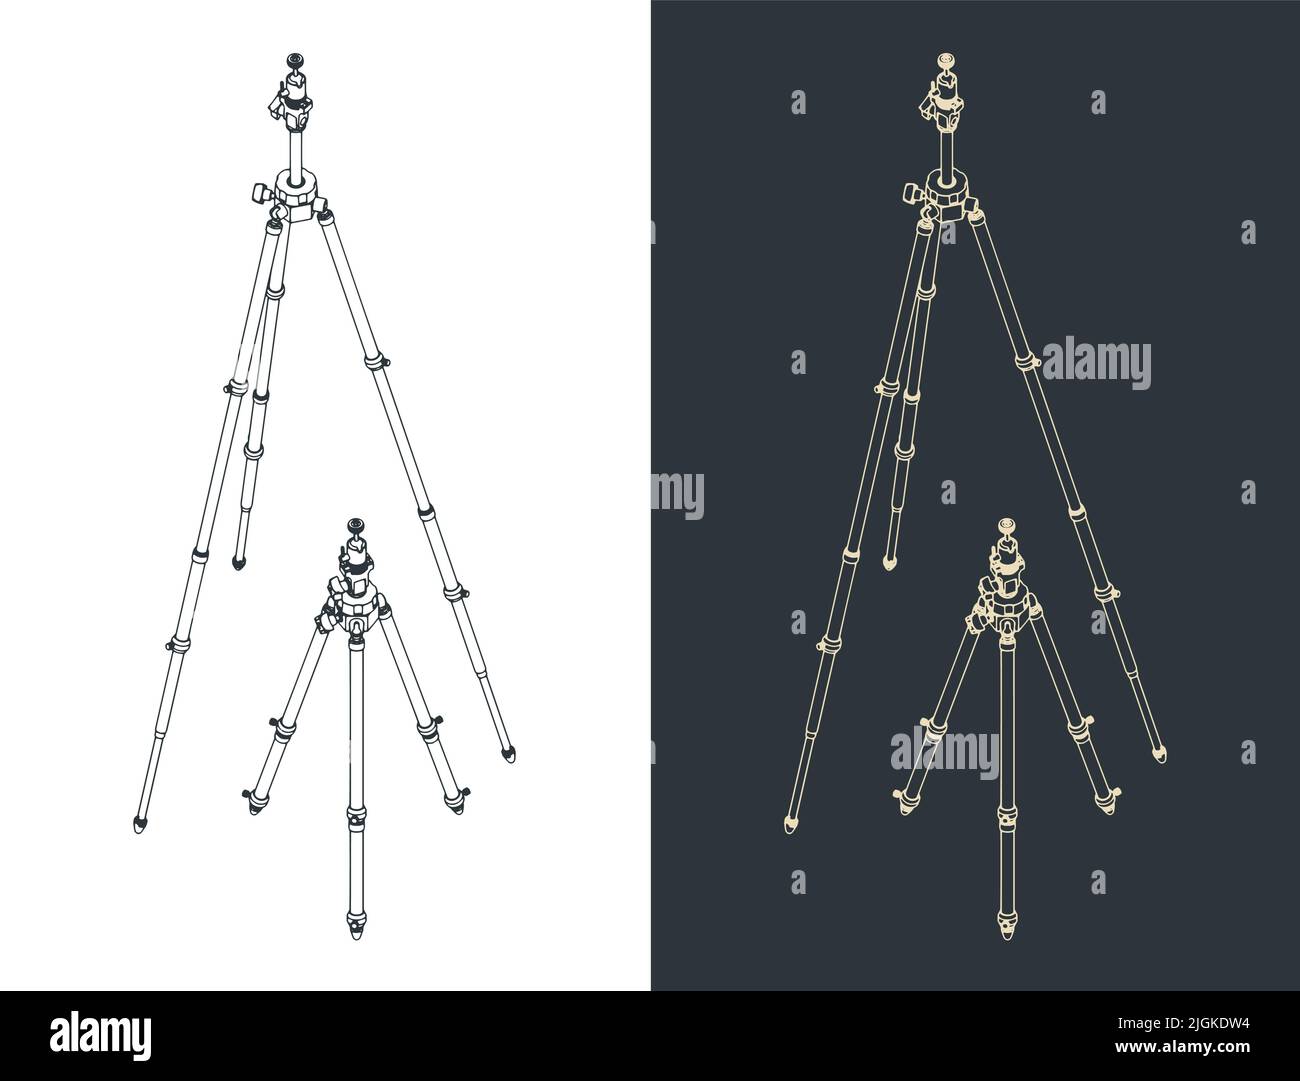 Stylized vector illustrations of isometric drawings of camera tripod Stock Vector